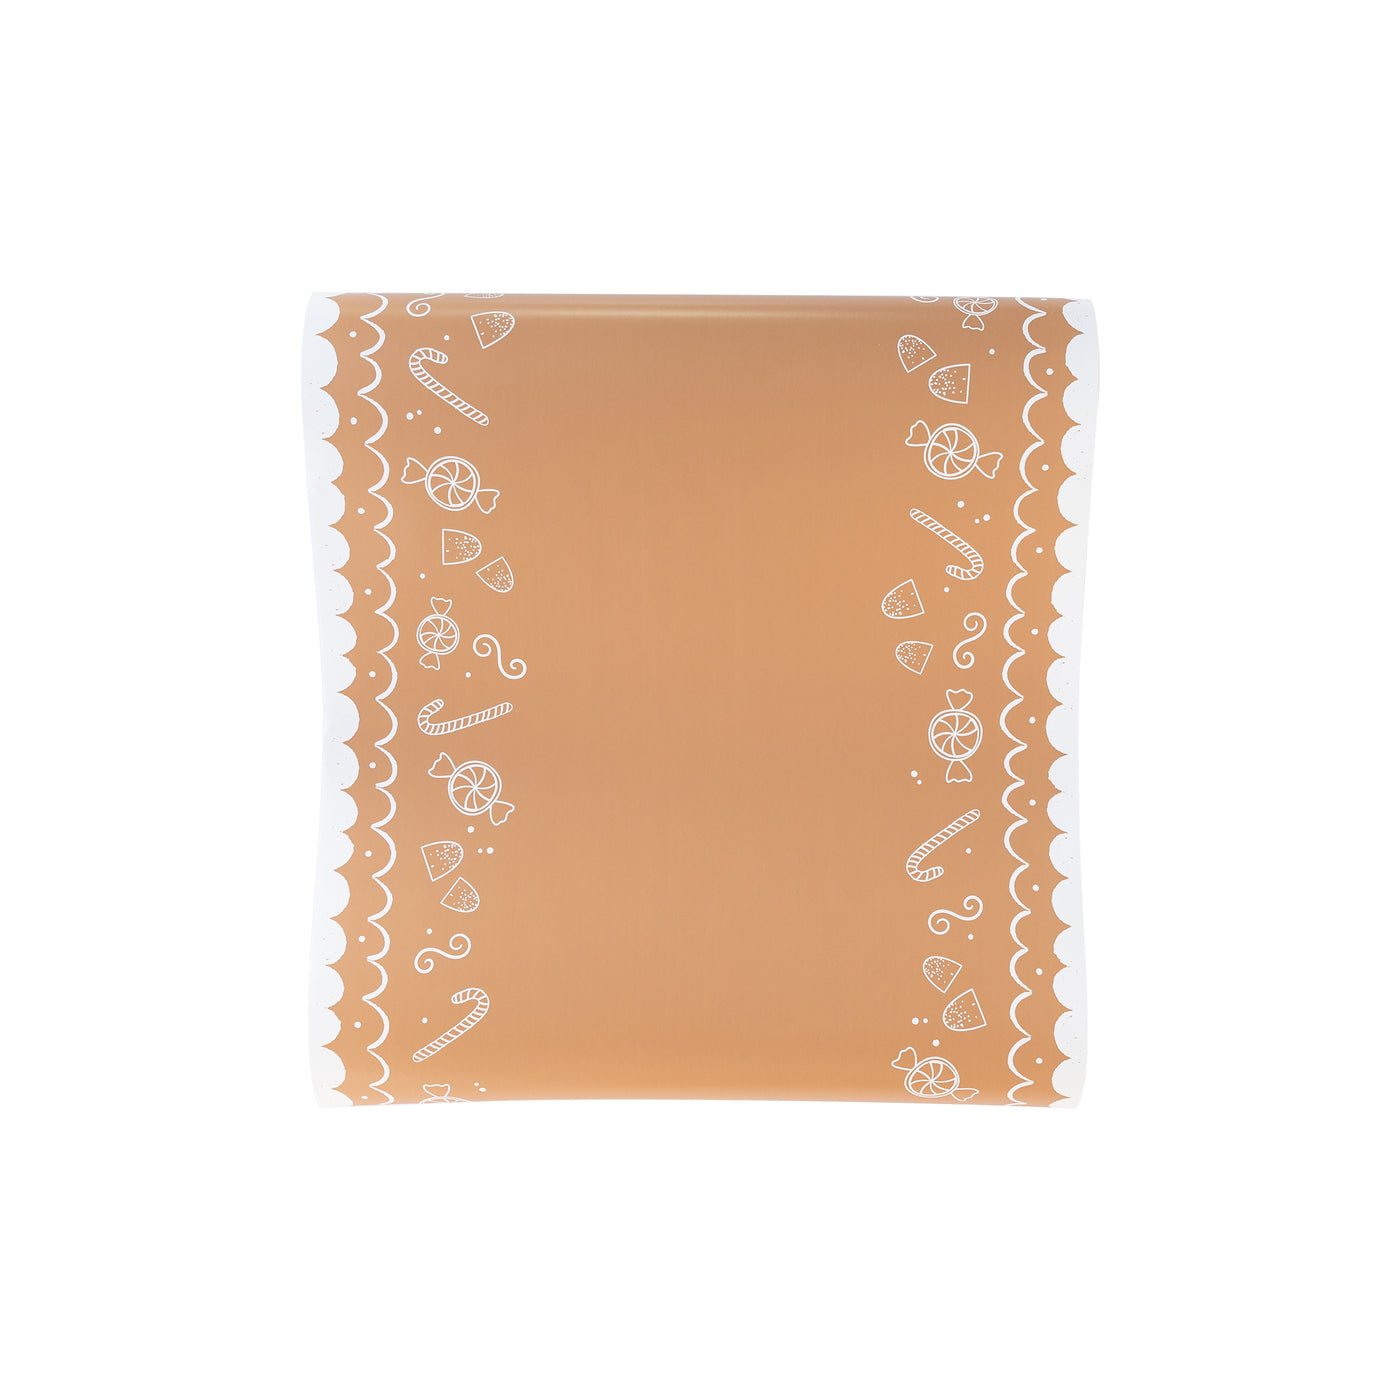 GBD920 - Occasions by Shakira - Gingerbread Table Runner